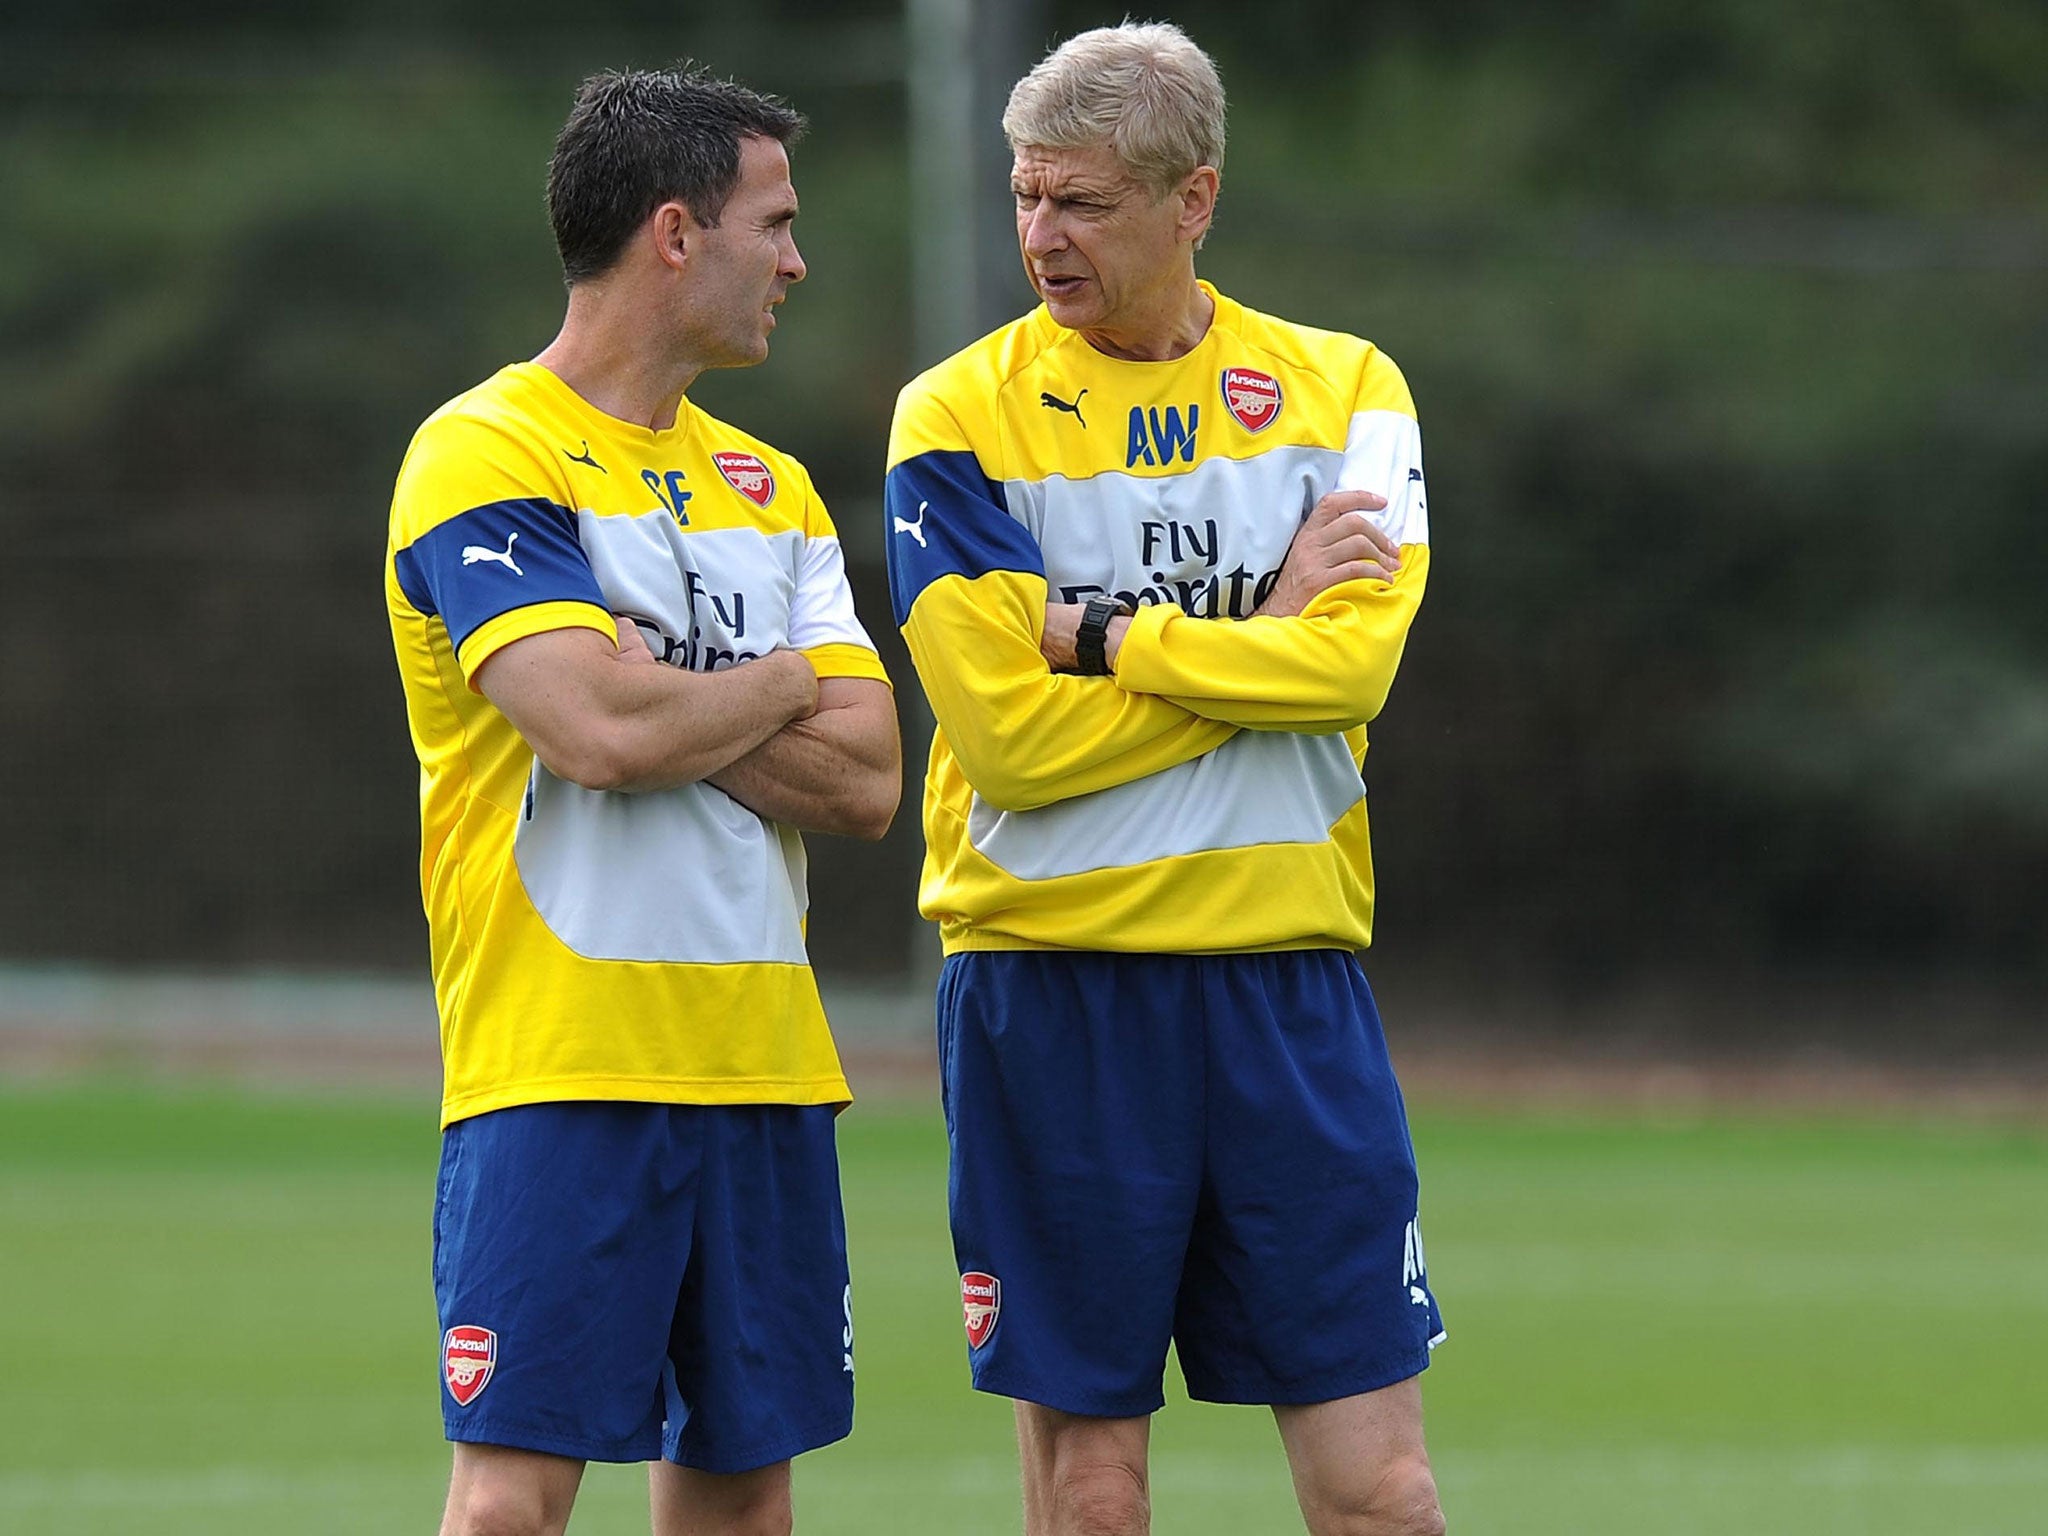 Shad Forsythe (right) converses with Arsenal manager Arsene Wenger during the Gunners' pre-season training